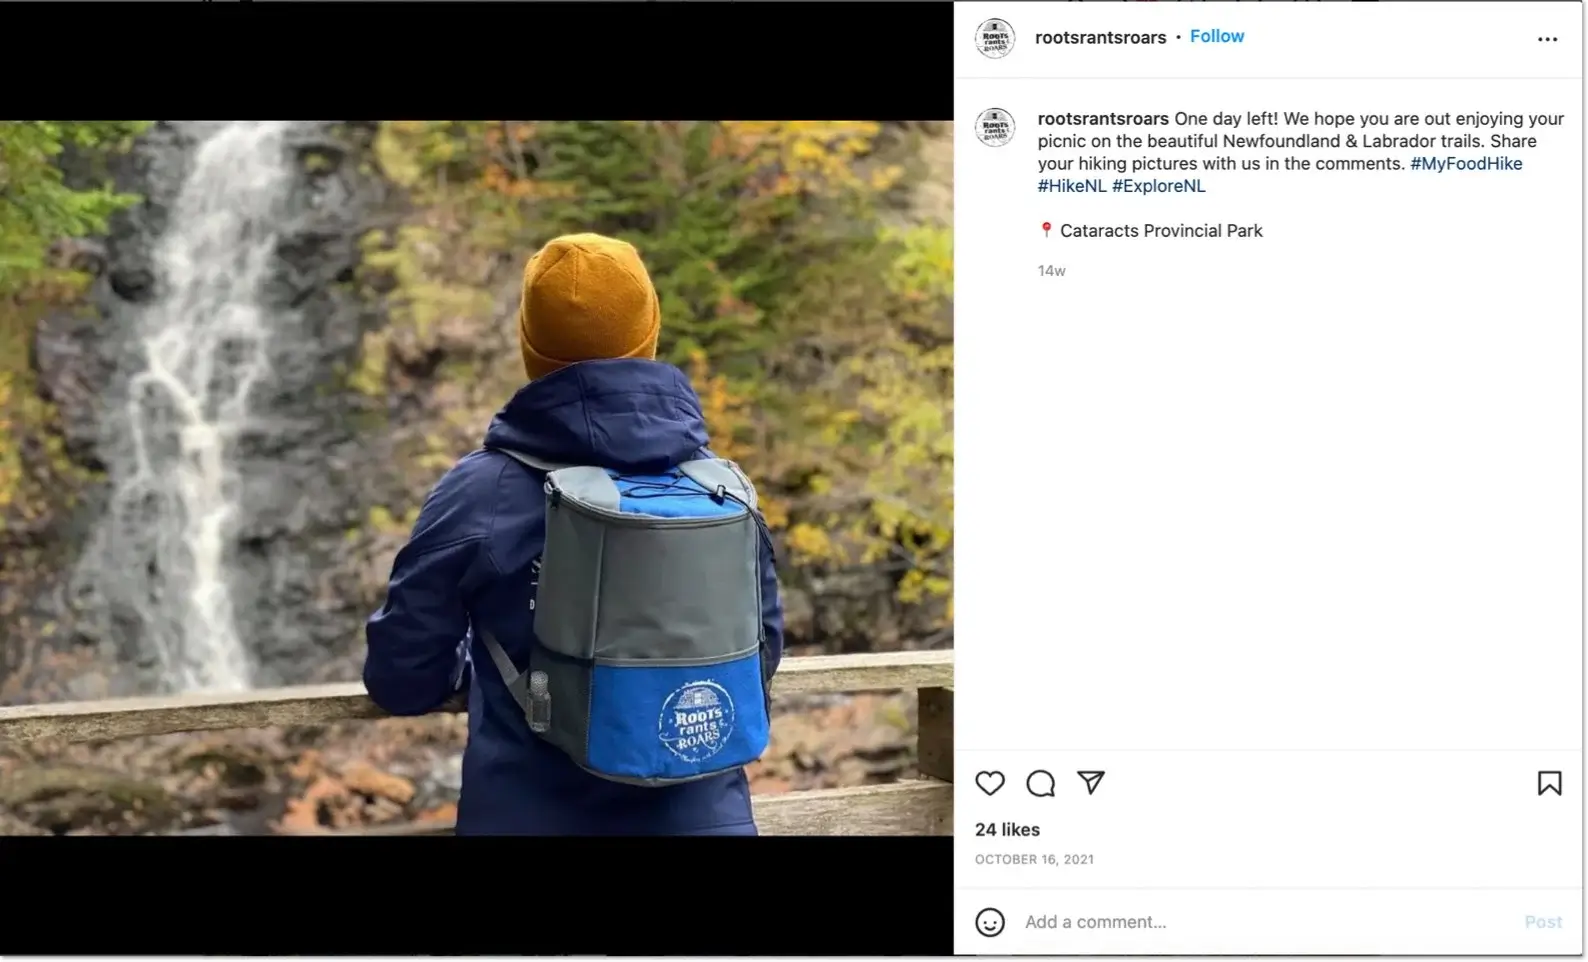 Repurposing user-generated content gathered in an instagram photo contest